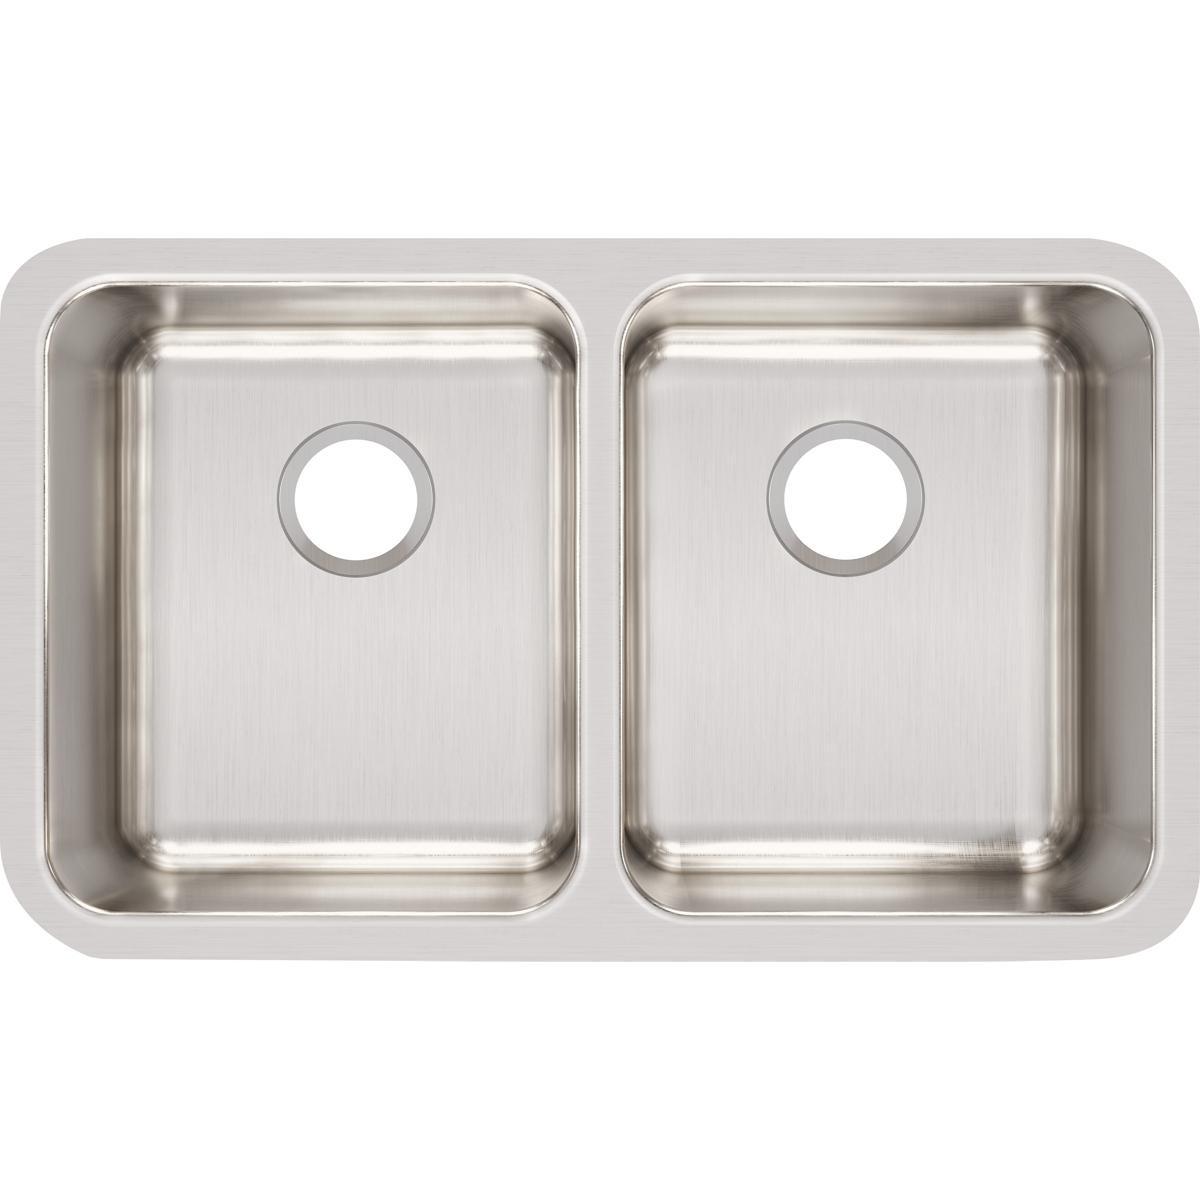 Elkay Lustertone Classic Stainless Steel 30-3/4" x 18-1/2" x 10", Equal Double Bowl Undermount Sink-DirectSinks